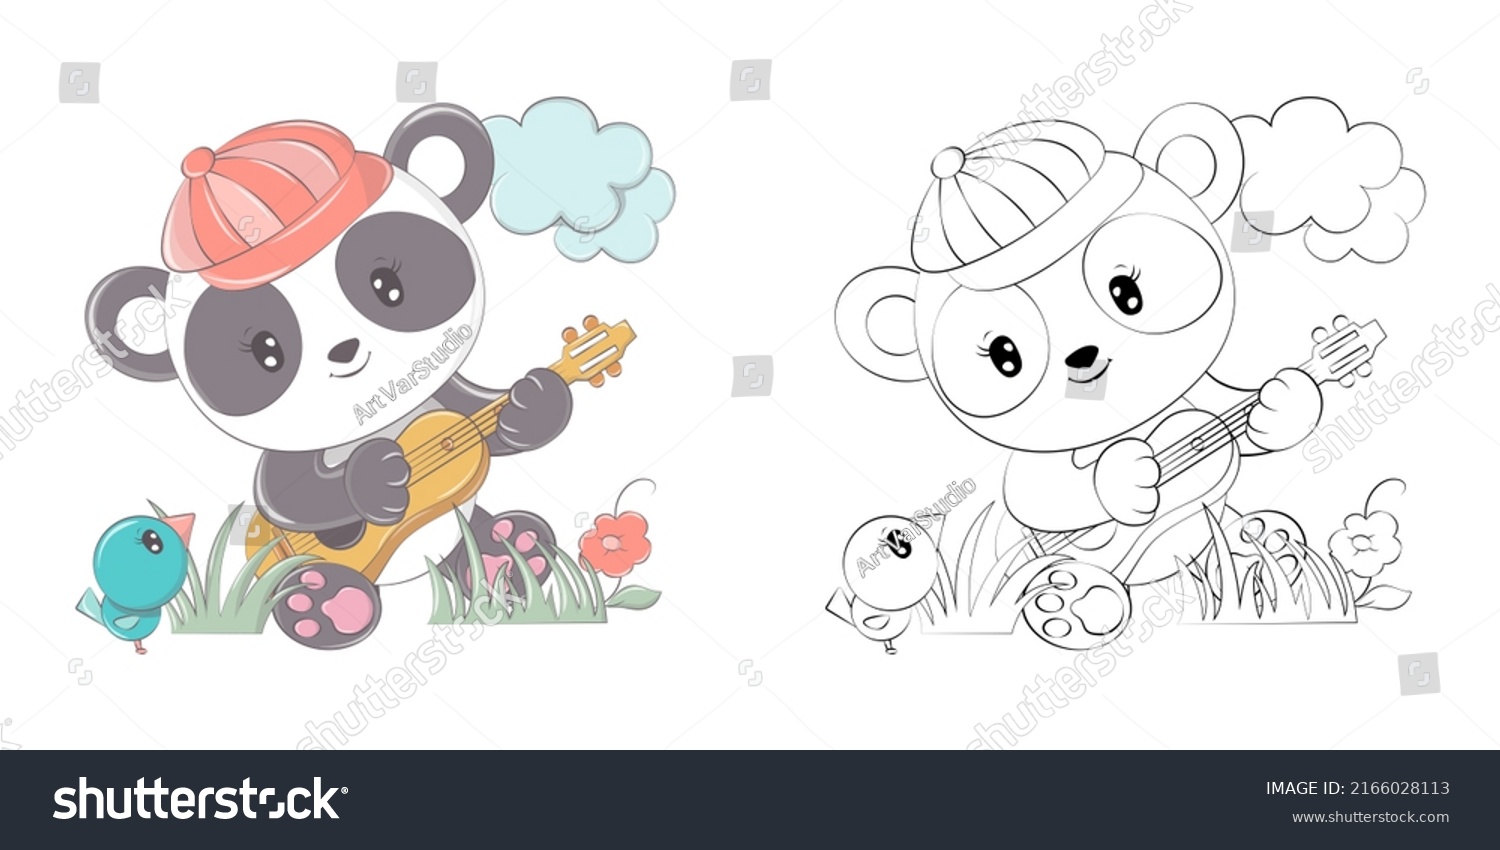 SVG of Panda Clipart Multicolored and Black and White. Beautiful Clip Art Panda Plays the Guitar. Vector Illustration of an Animal for Prints for Clothes, Stickers, Baby Shower, Coloring Pages.  svg